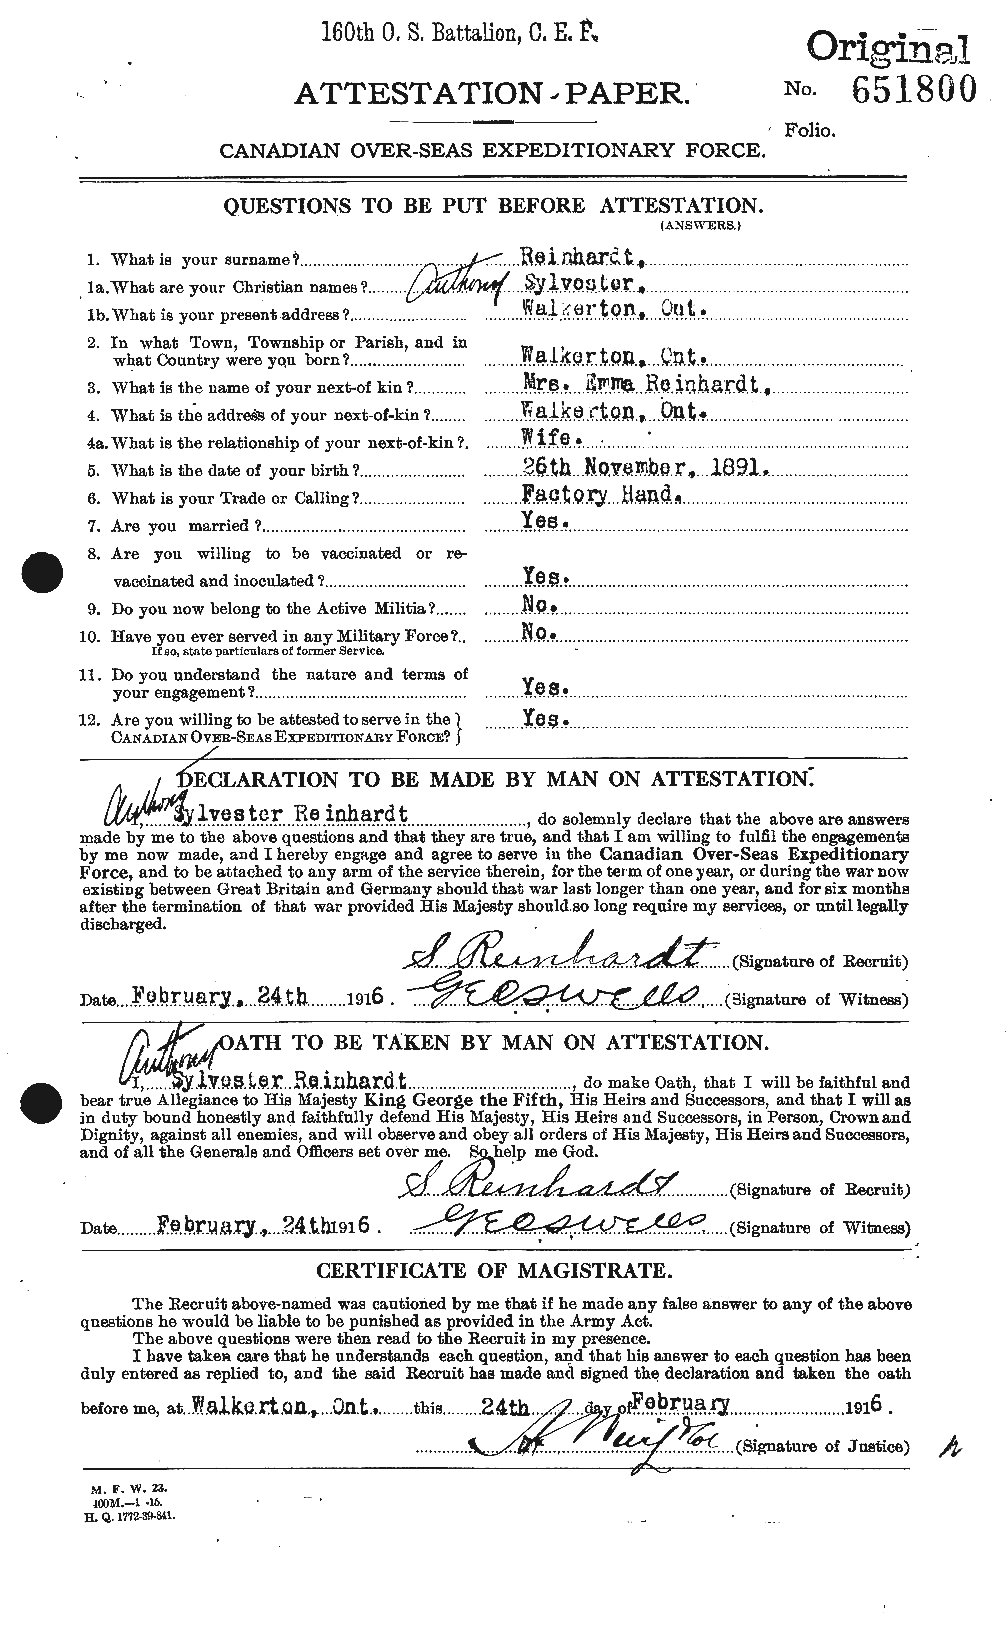 Personnel Records of the First World War - CEF 599367a